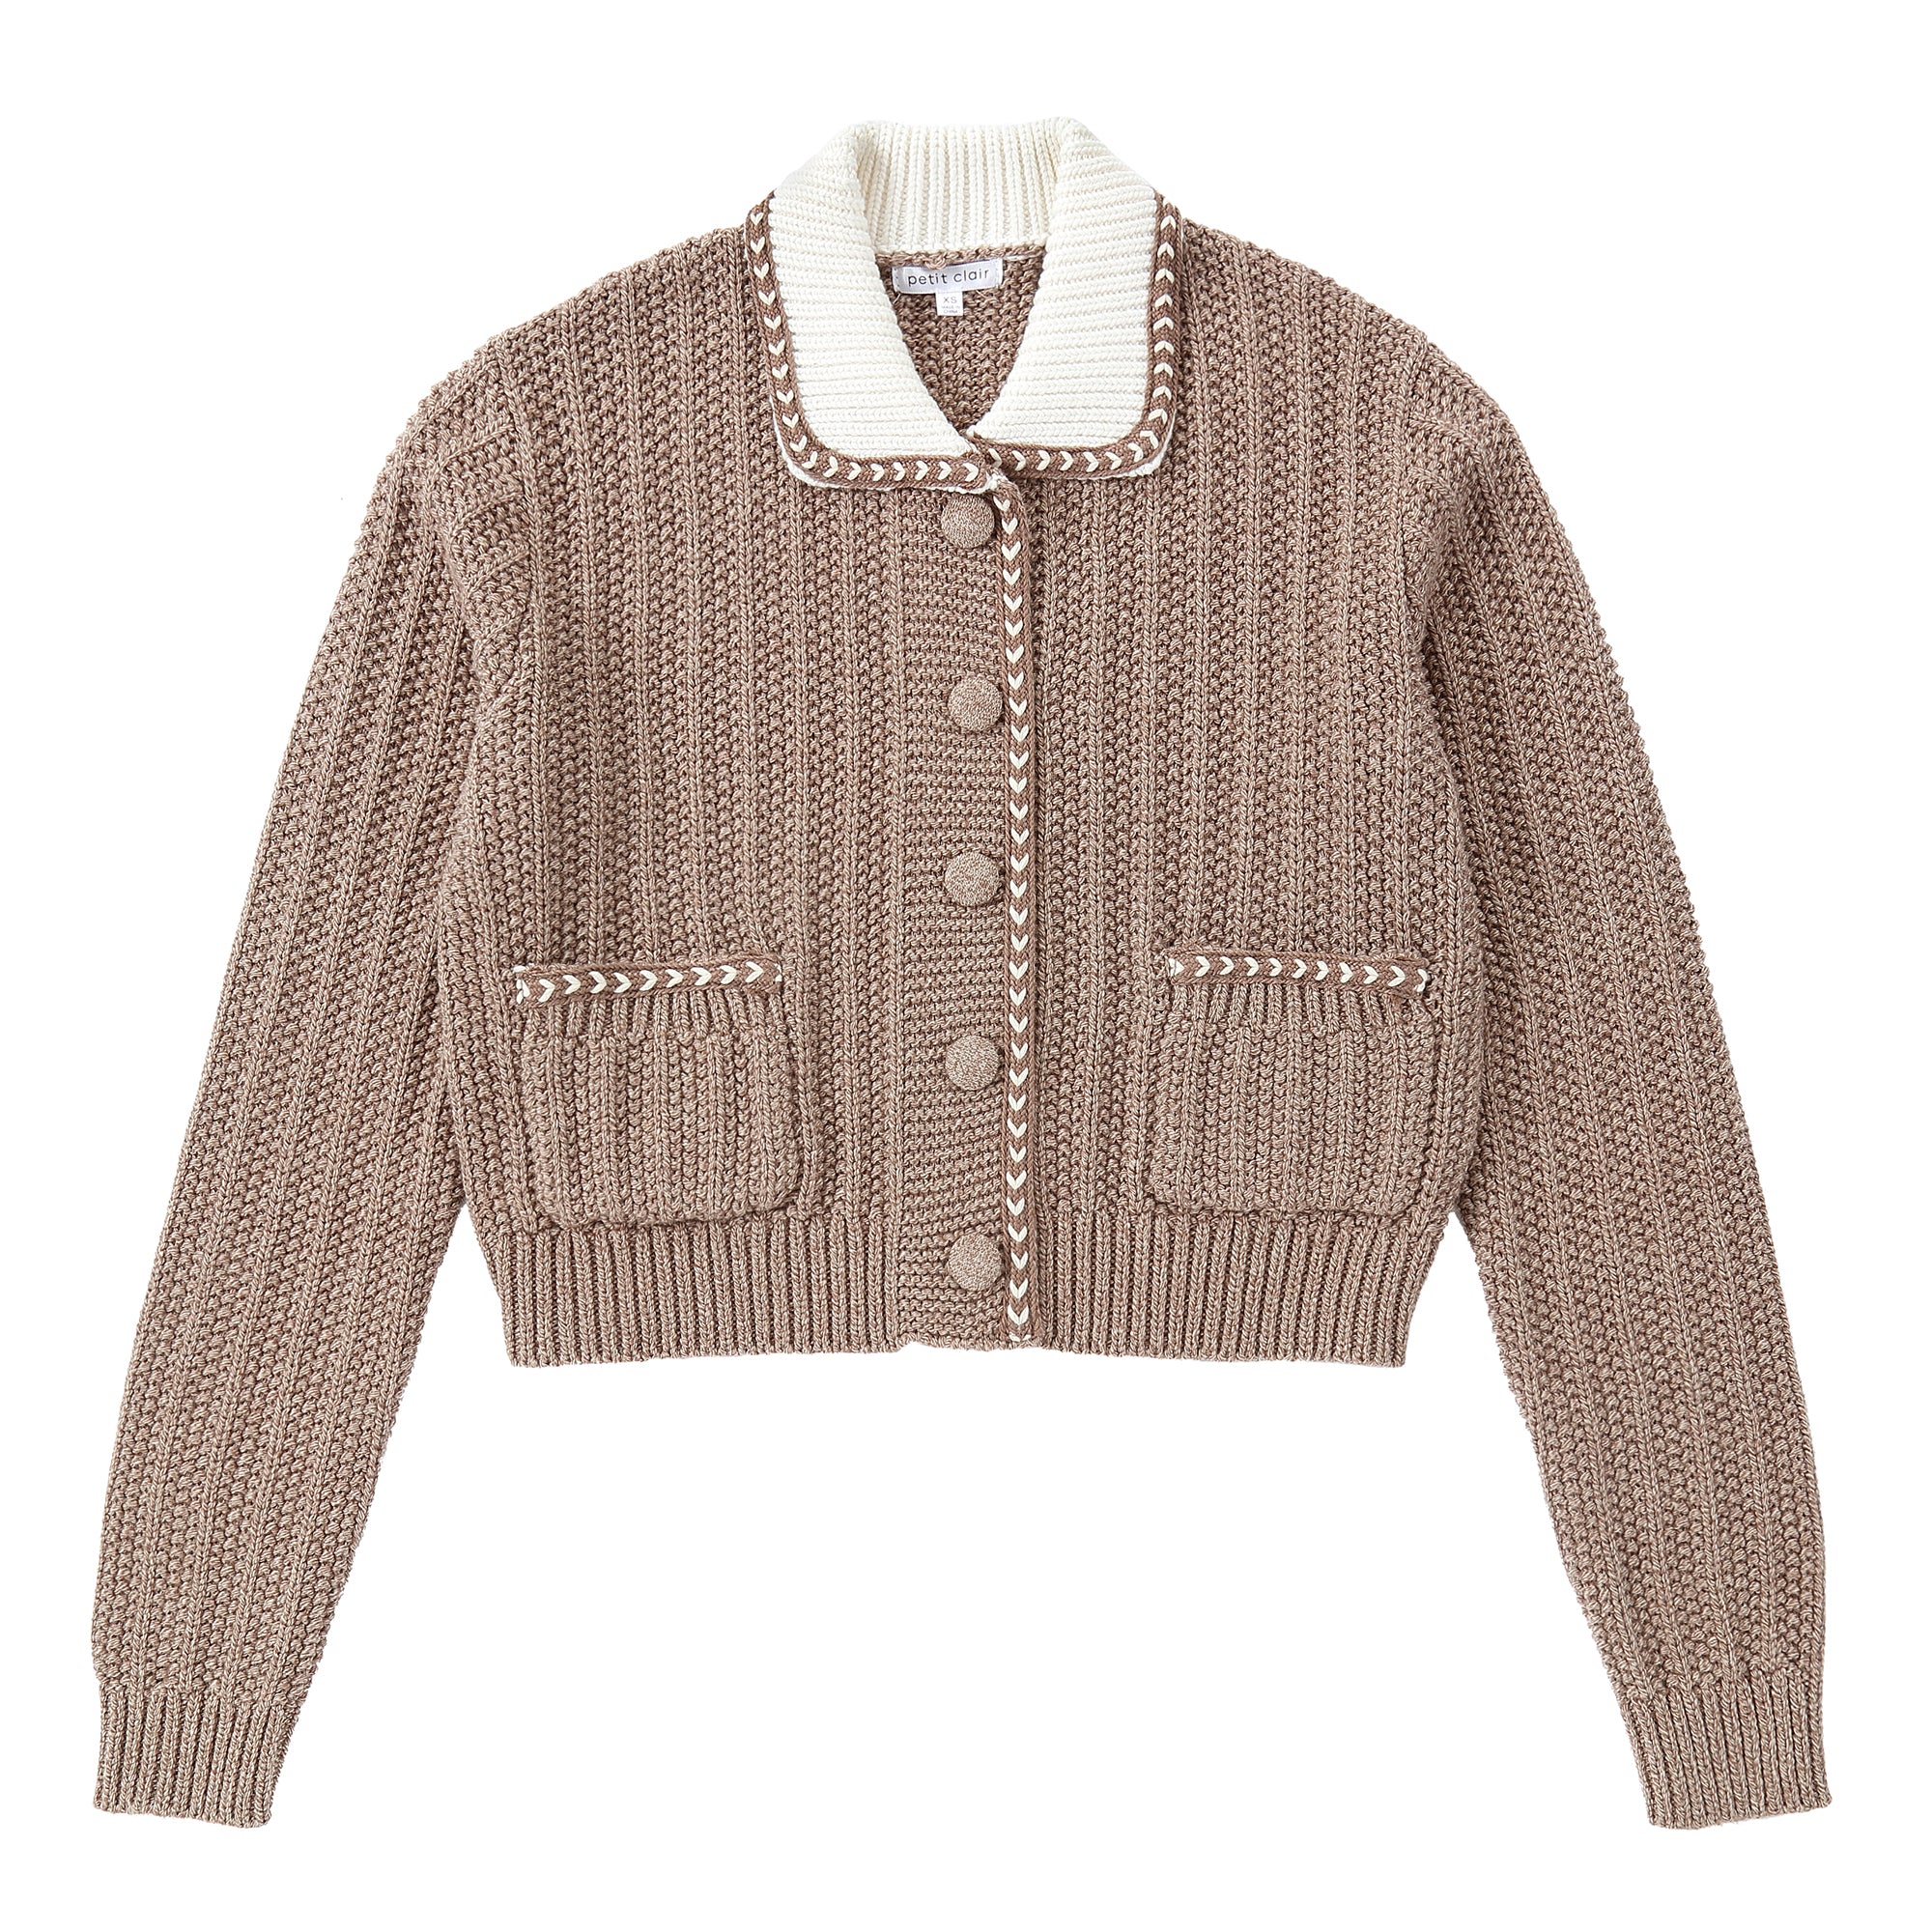 Tan Collared Cardigan With Ivory Accents